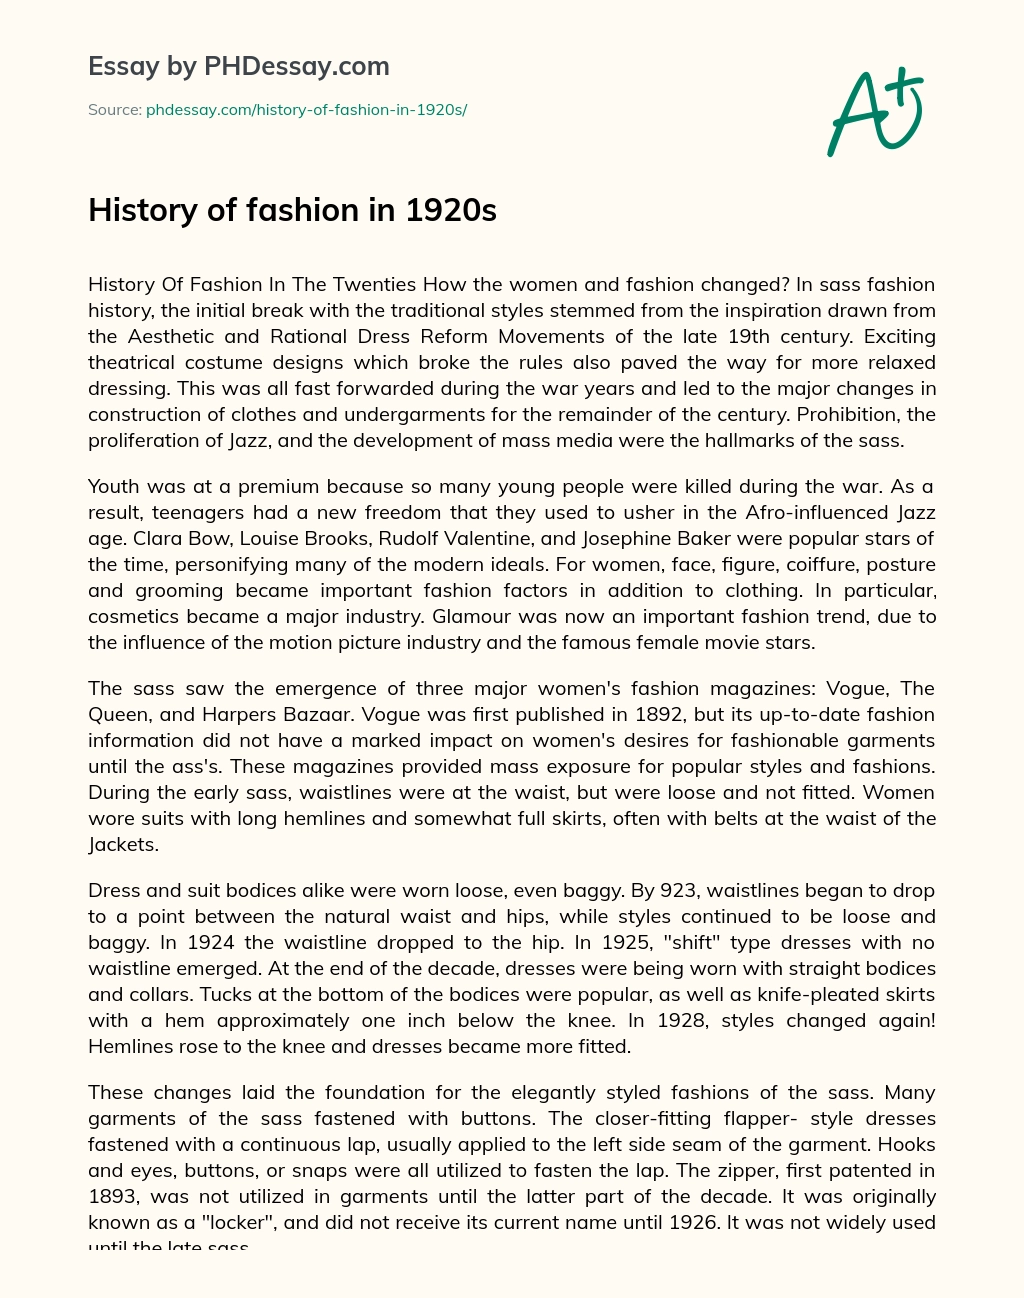 History of fashion in 1920s essay